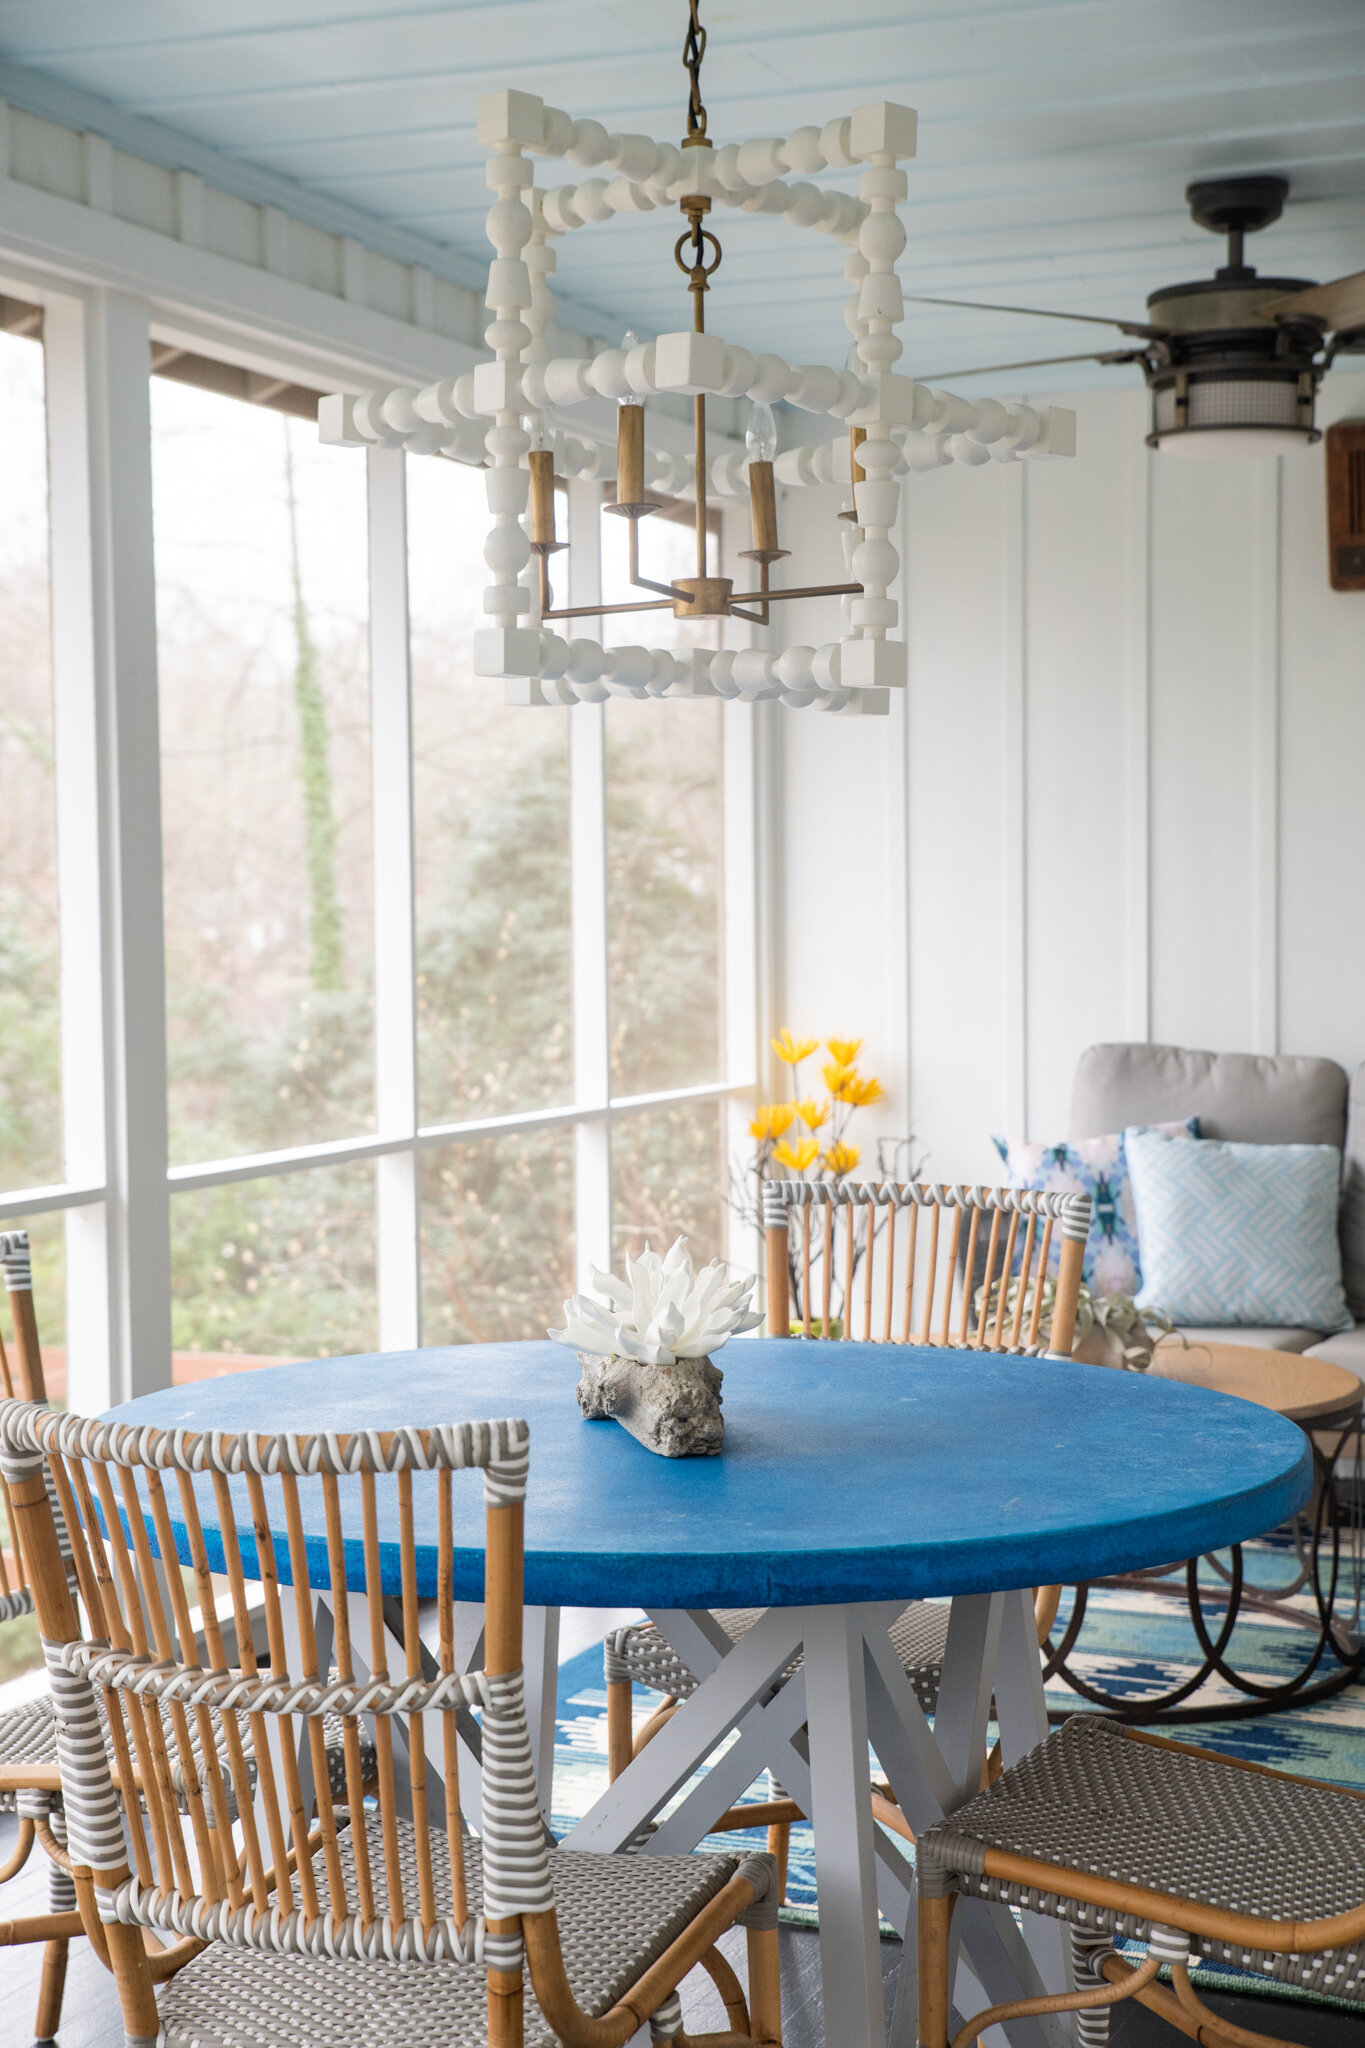 Dwell-Chic-Colorful-Coastal-Porch-Blue-Table-And-White-Chandelier.jpg